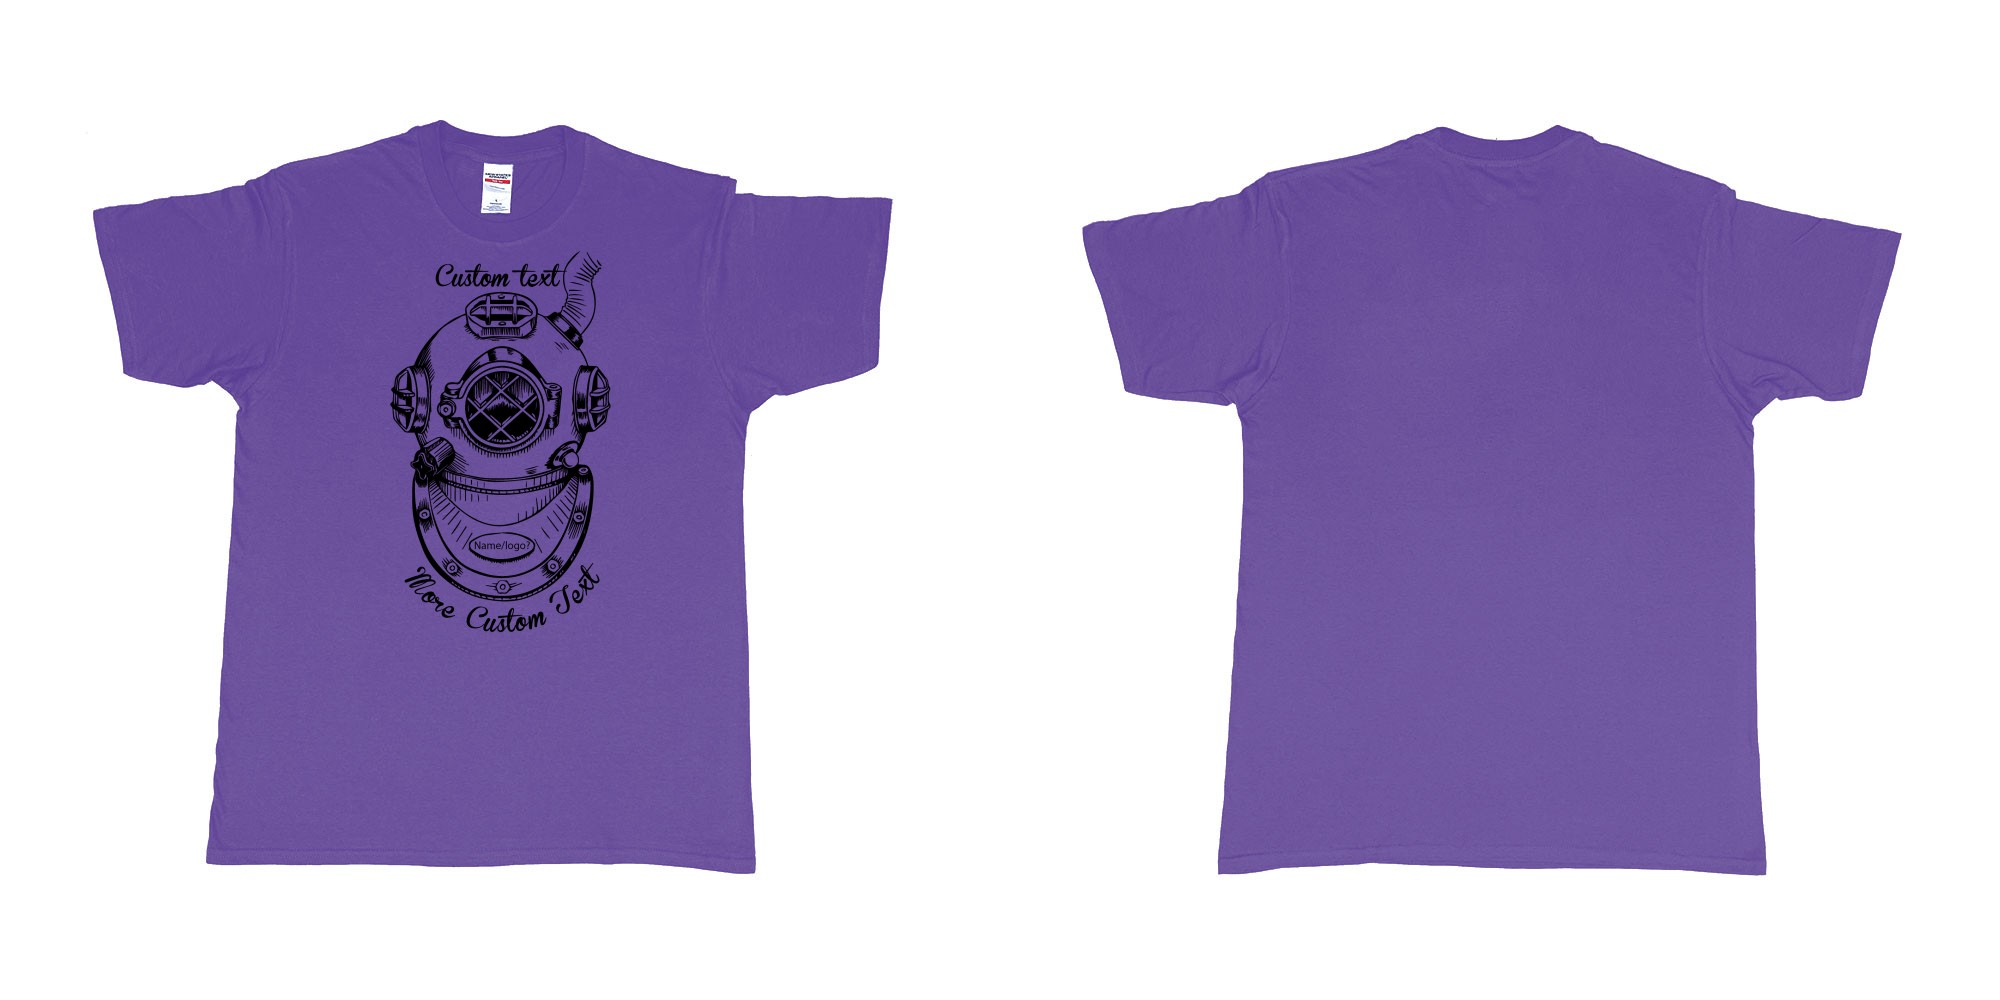 Custom tshirt design old school diving helmet custom own text dtg printing bali in fabric color purple choice your own text made in Bali by The Pirate Way